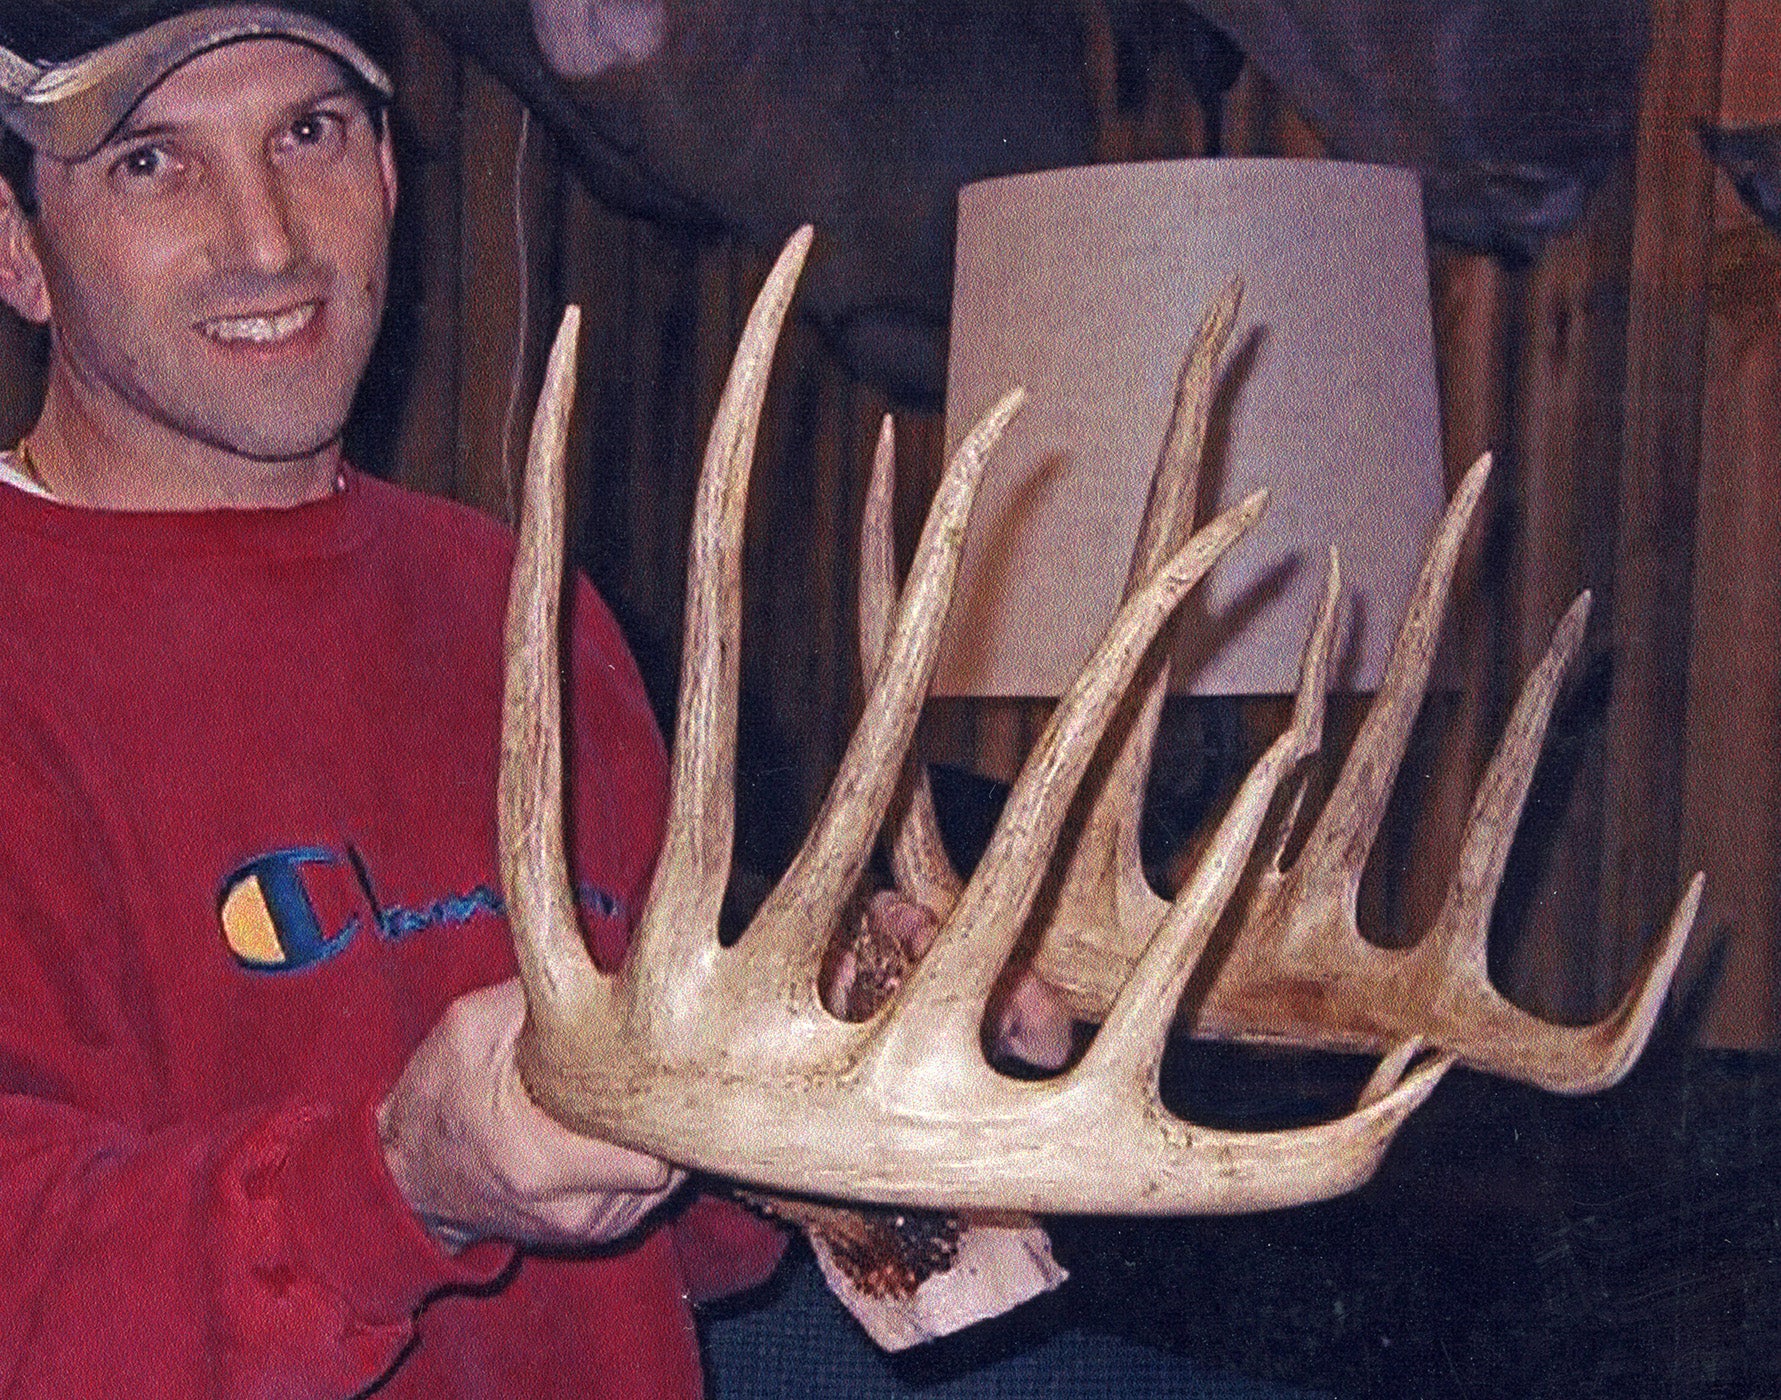 B&C record whitetail buck from New Hampsire